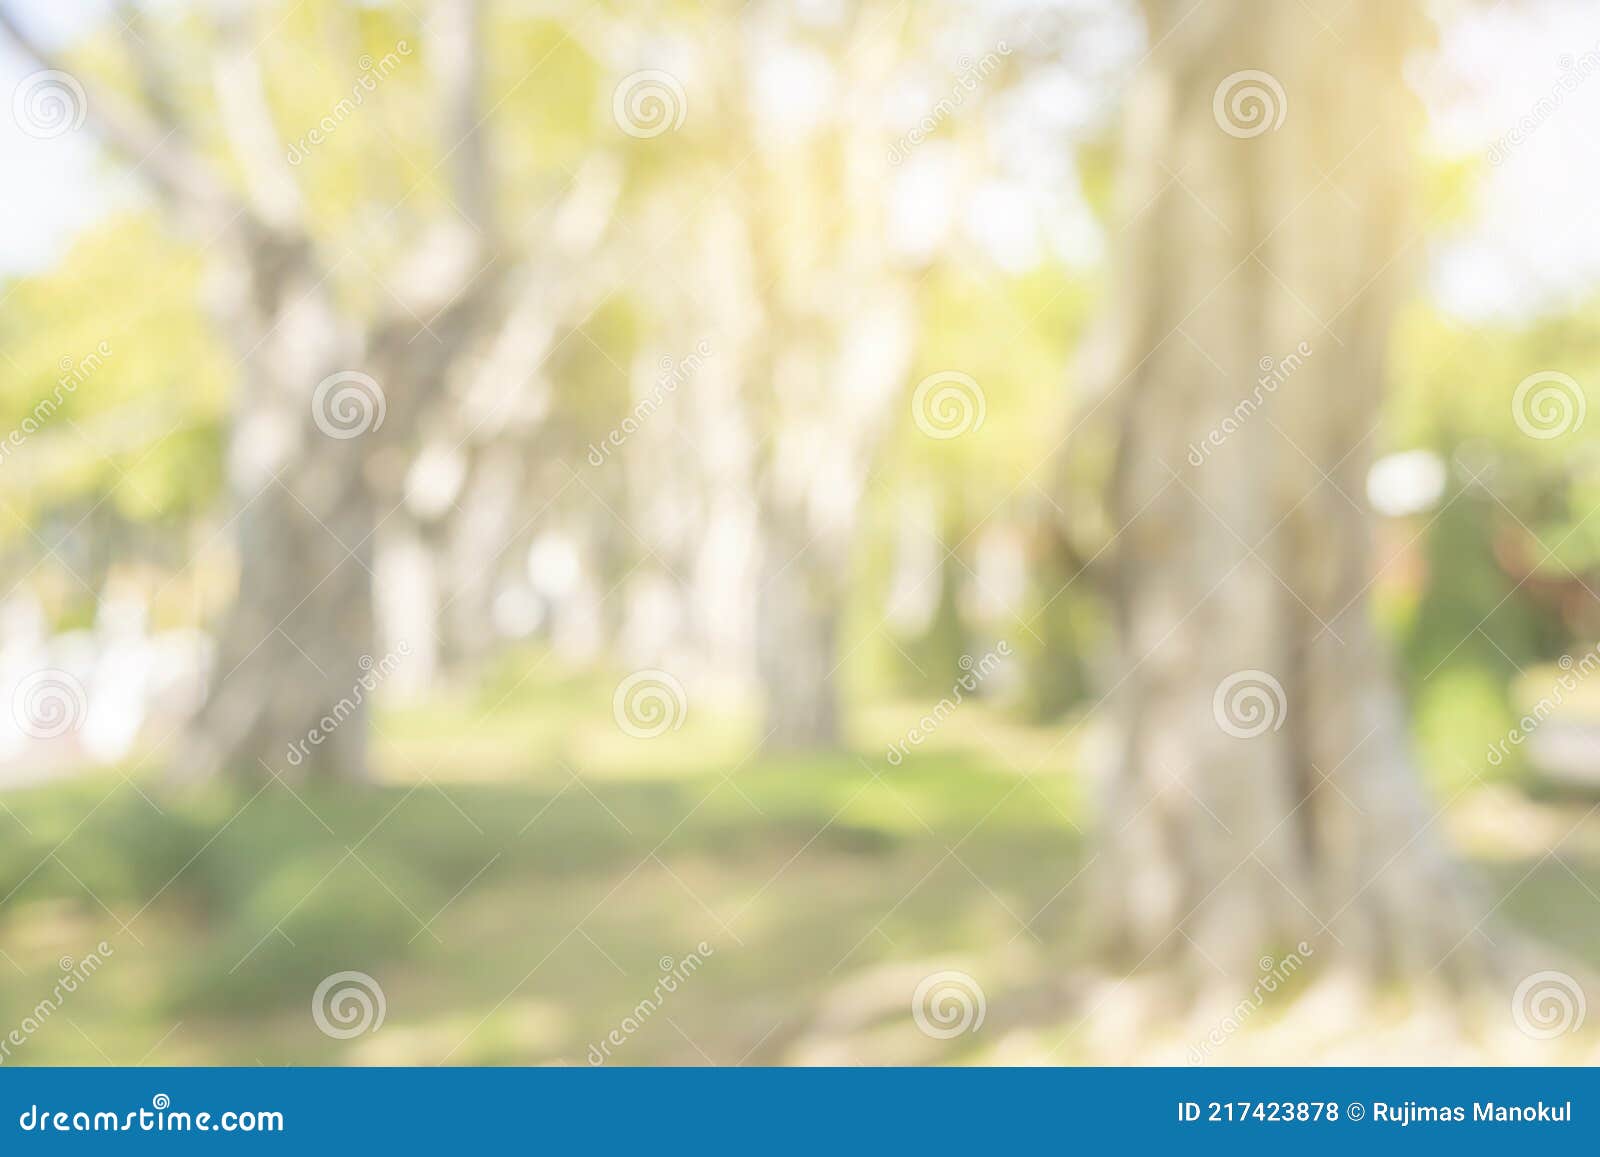 692 Blur Green Background Lawn Trees Garden Stock Photos - Free &  Royalty-Free Stock Photos from Dreamstime